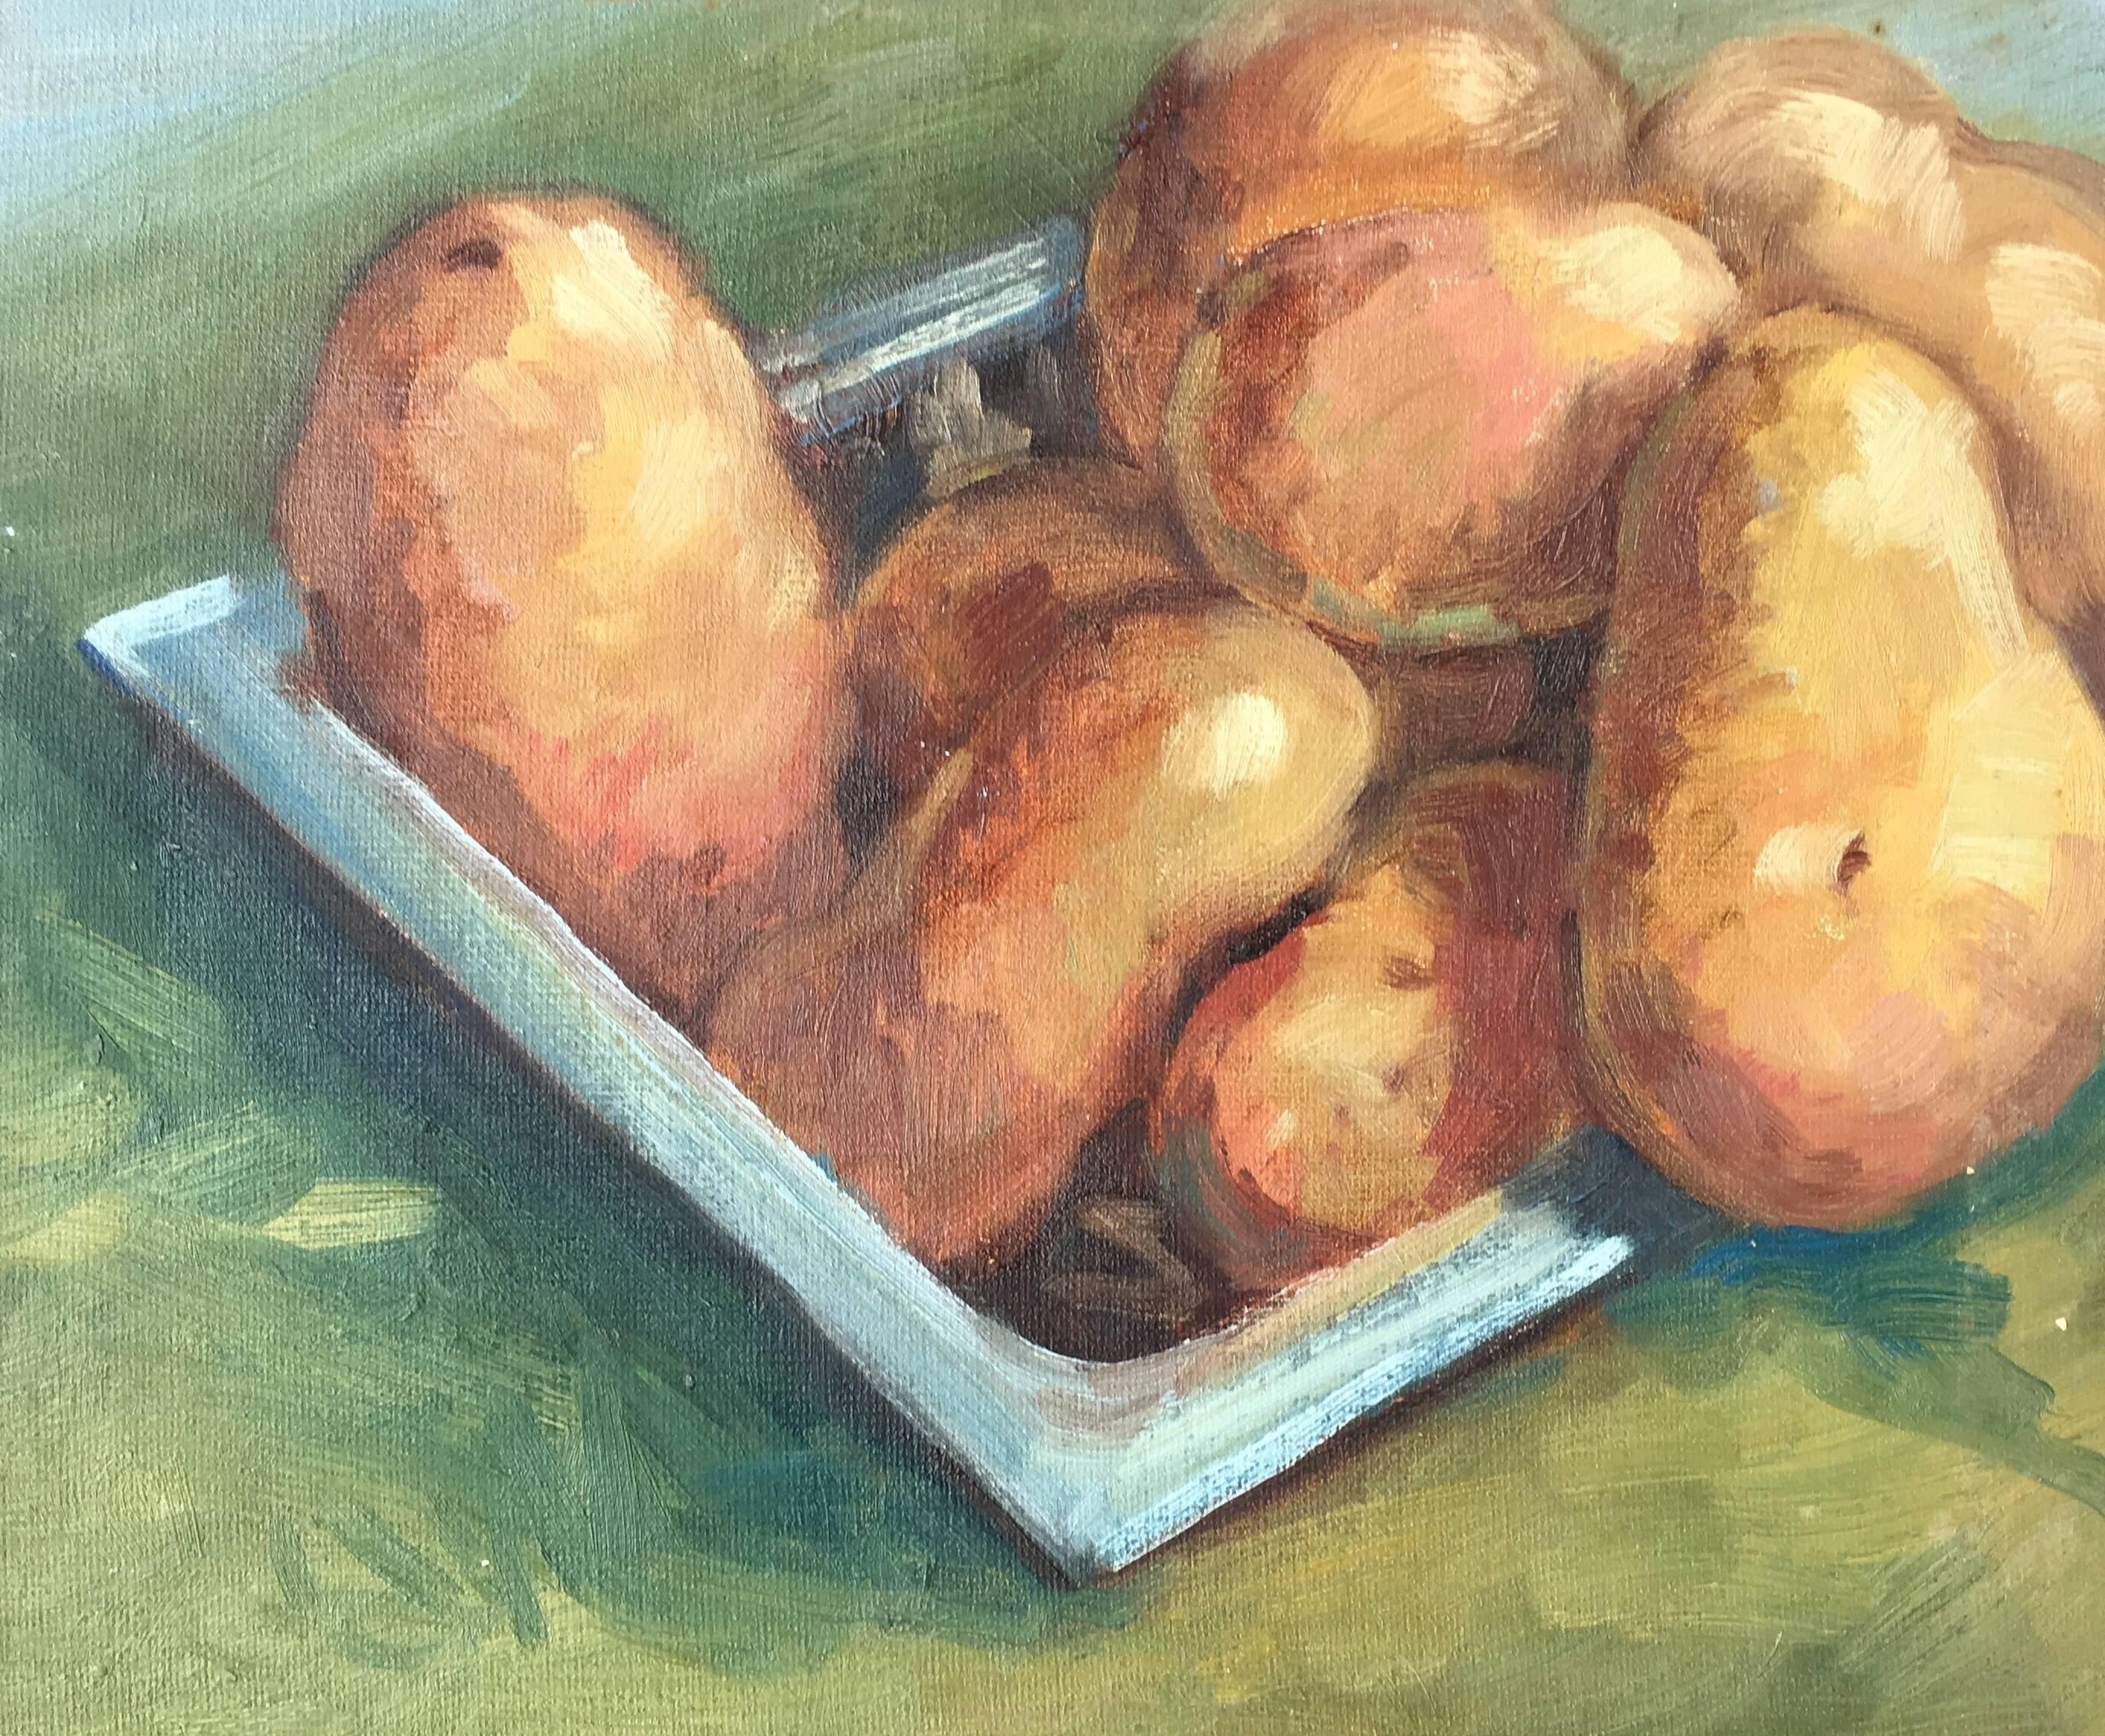 J.B. Holmes Interior Painting - Still life Oil Painting of a Crop of Potatoes 